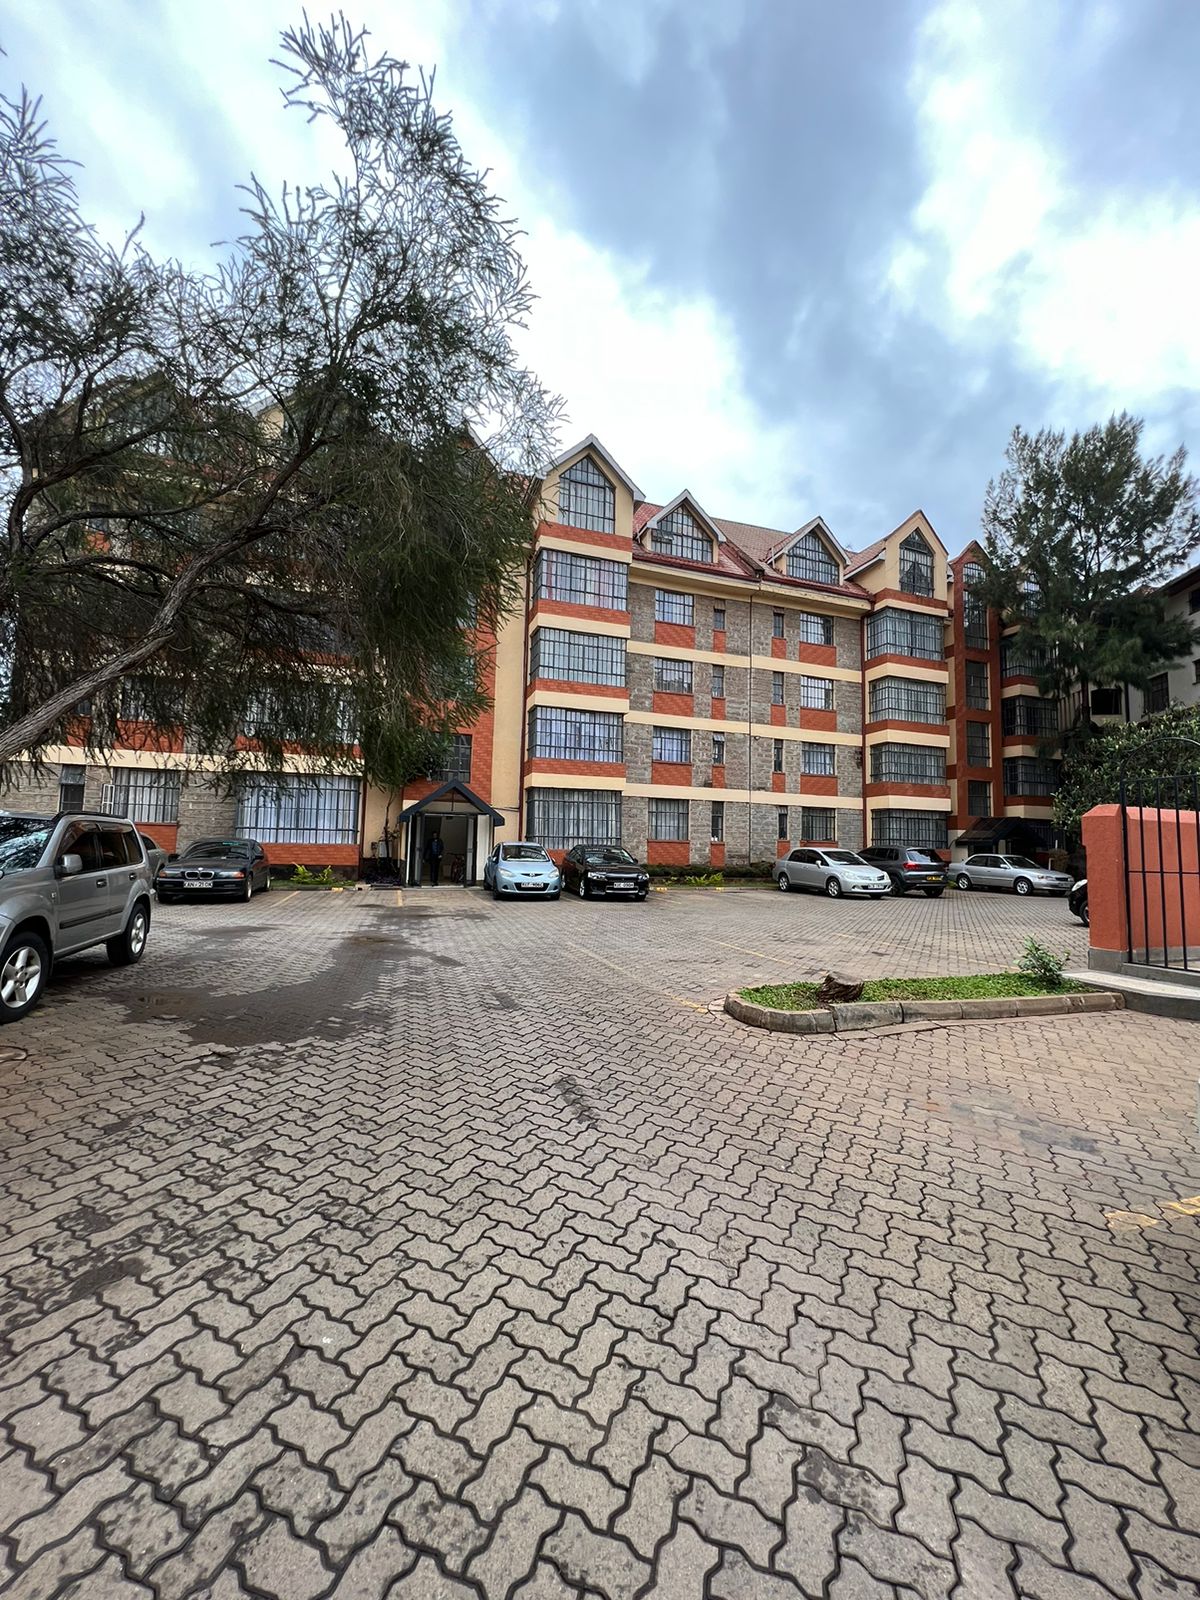 3 bedroom apartment to let in Kilimani. Musilli Homes